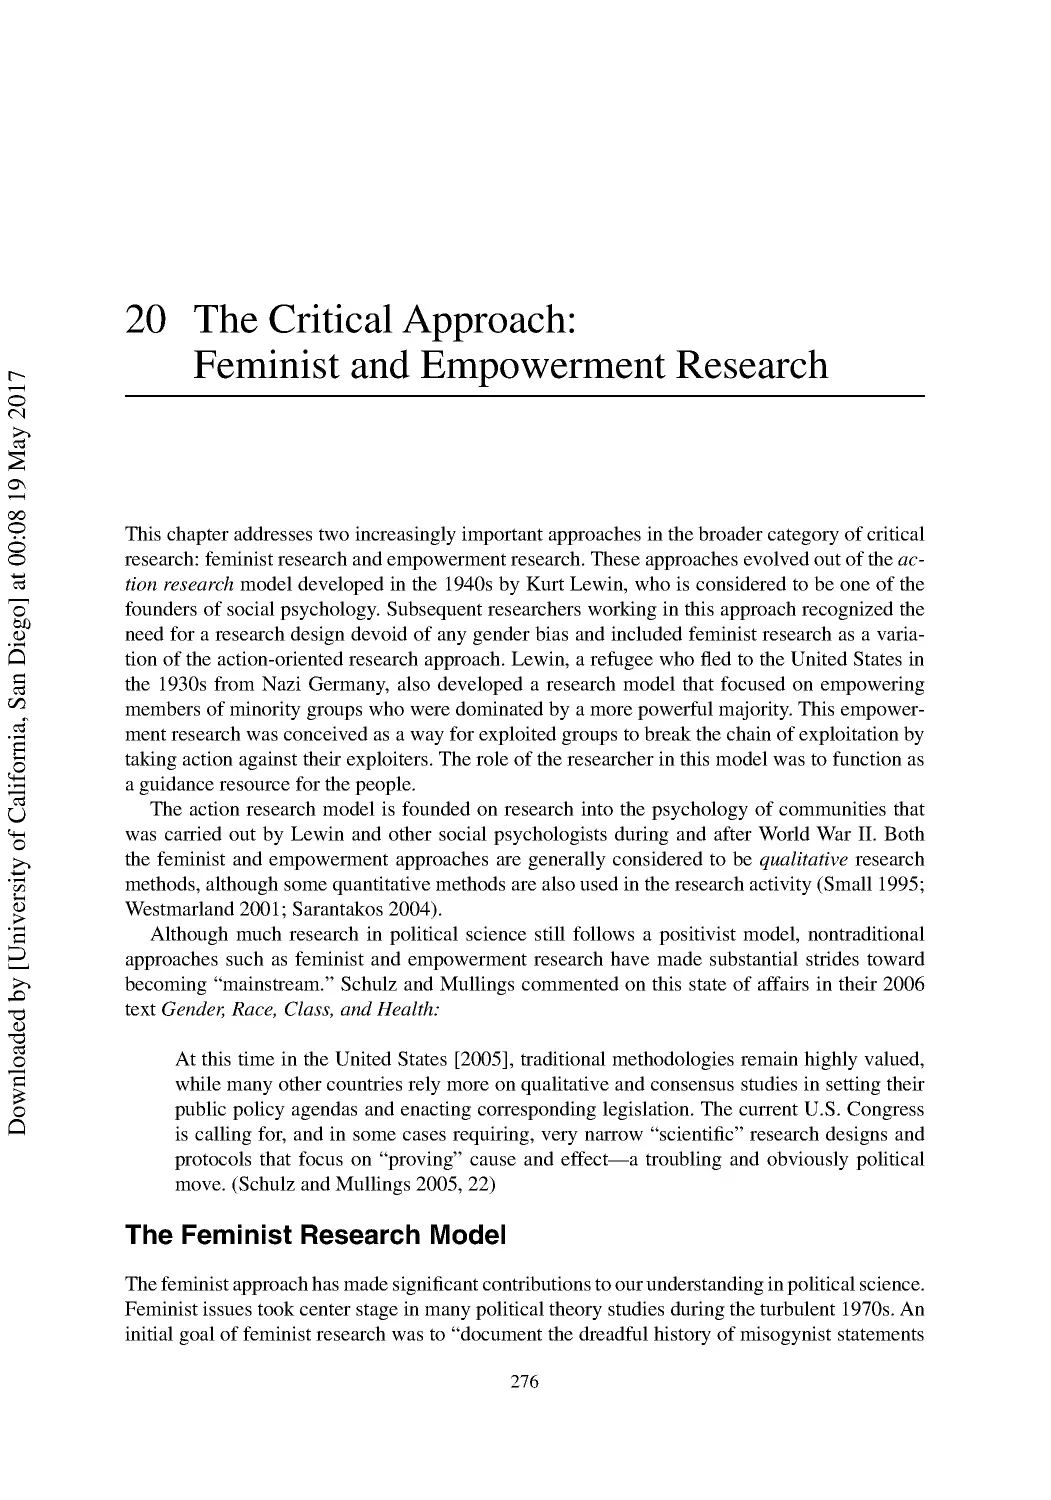 20 The Critical Approach: Feminist and Empowerment Research